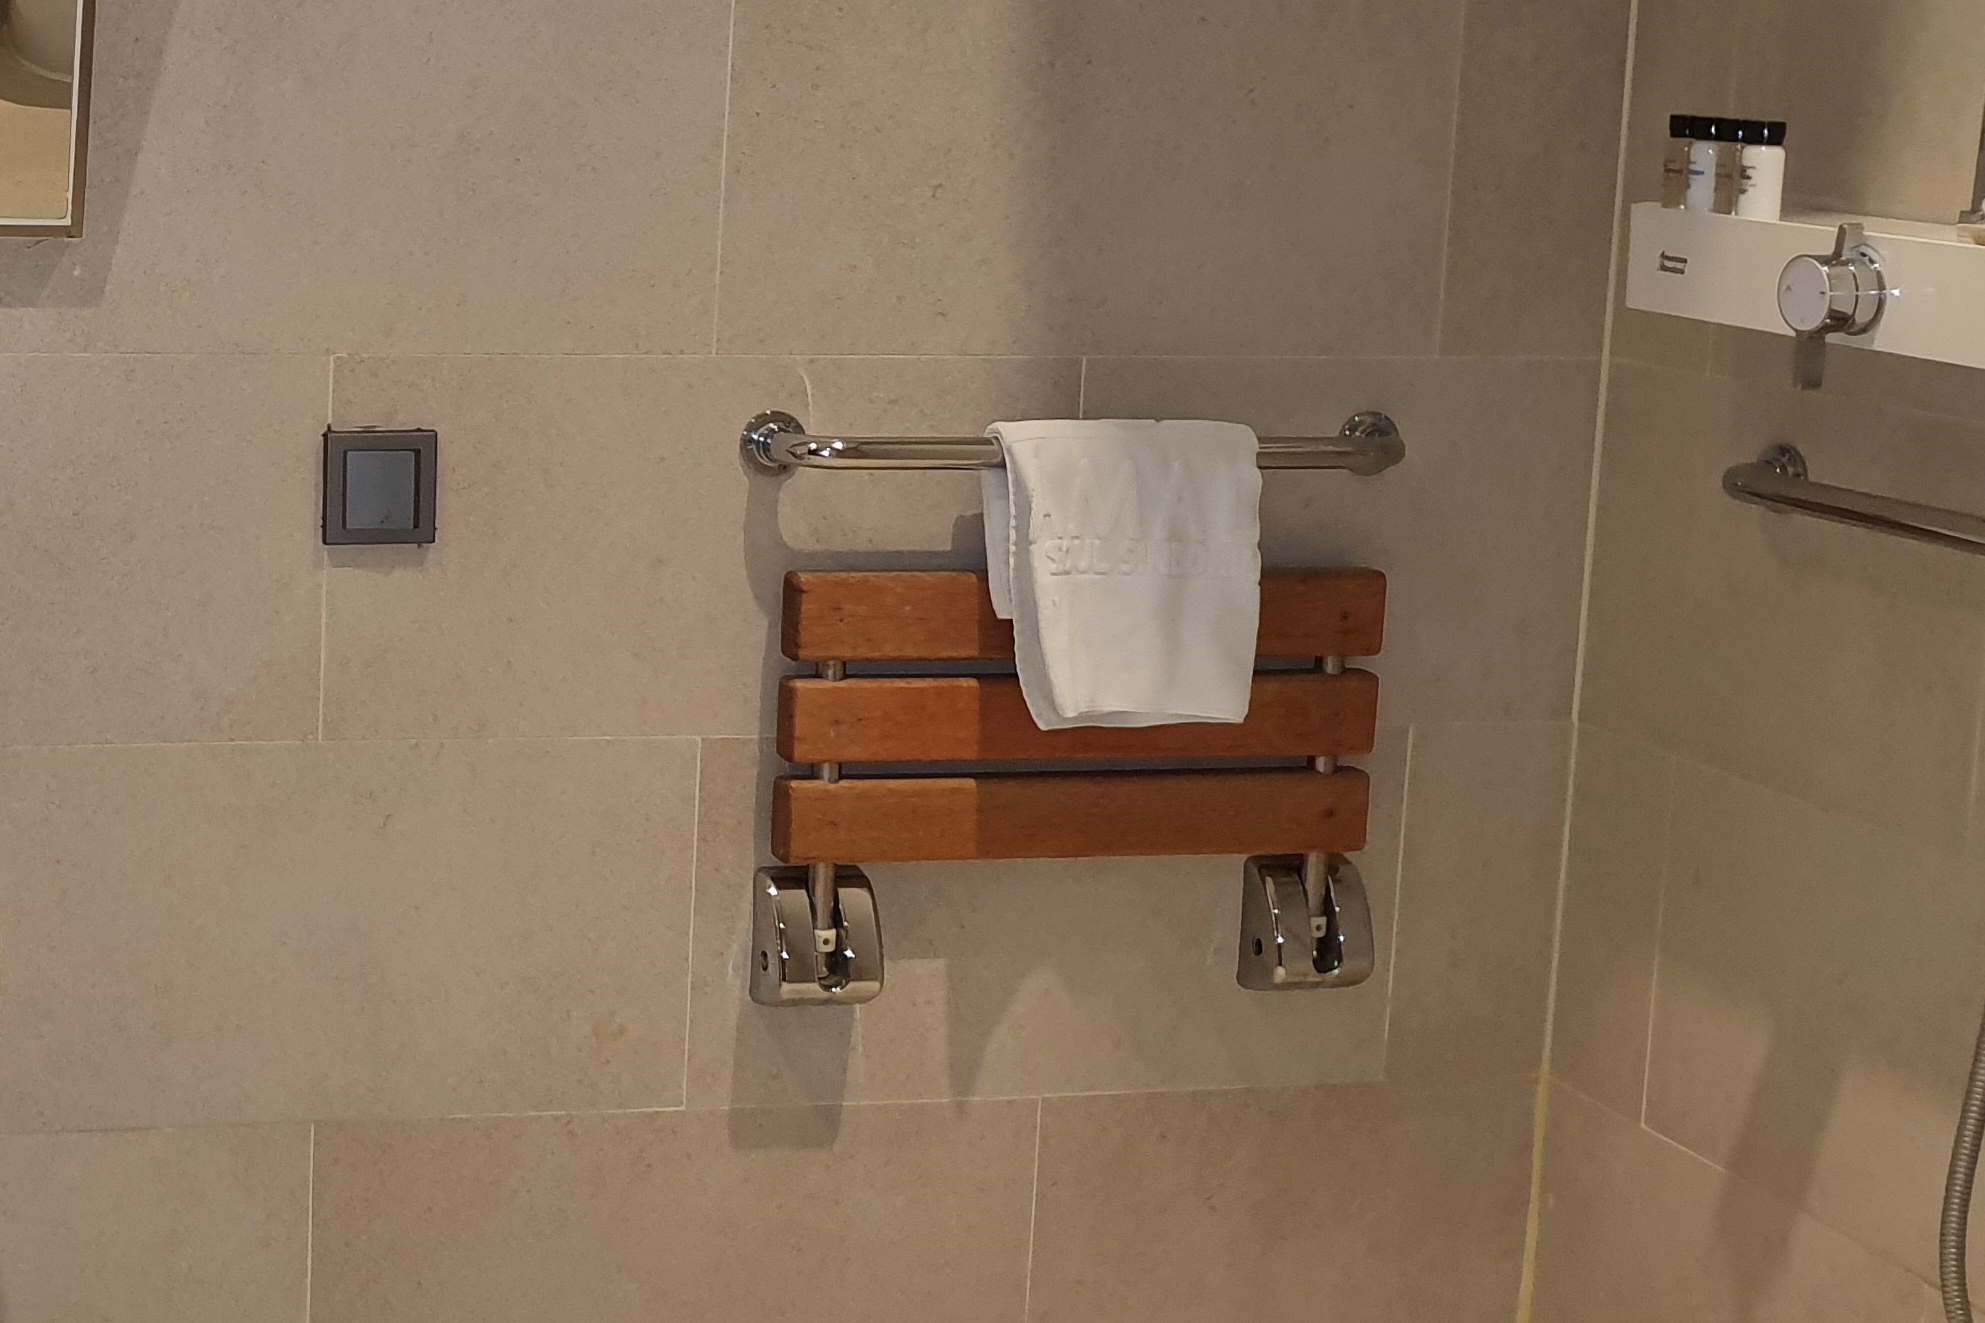 Bathroom in the guest room 0 : A wooden wall-mounted shower chair